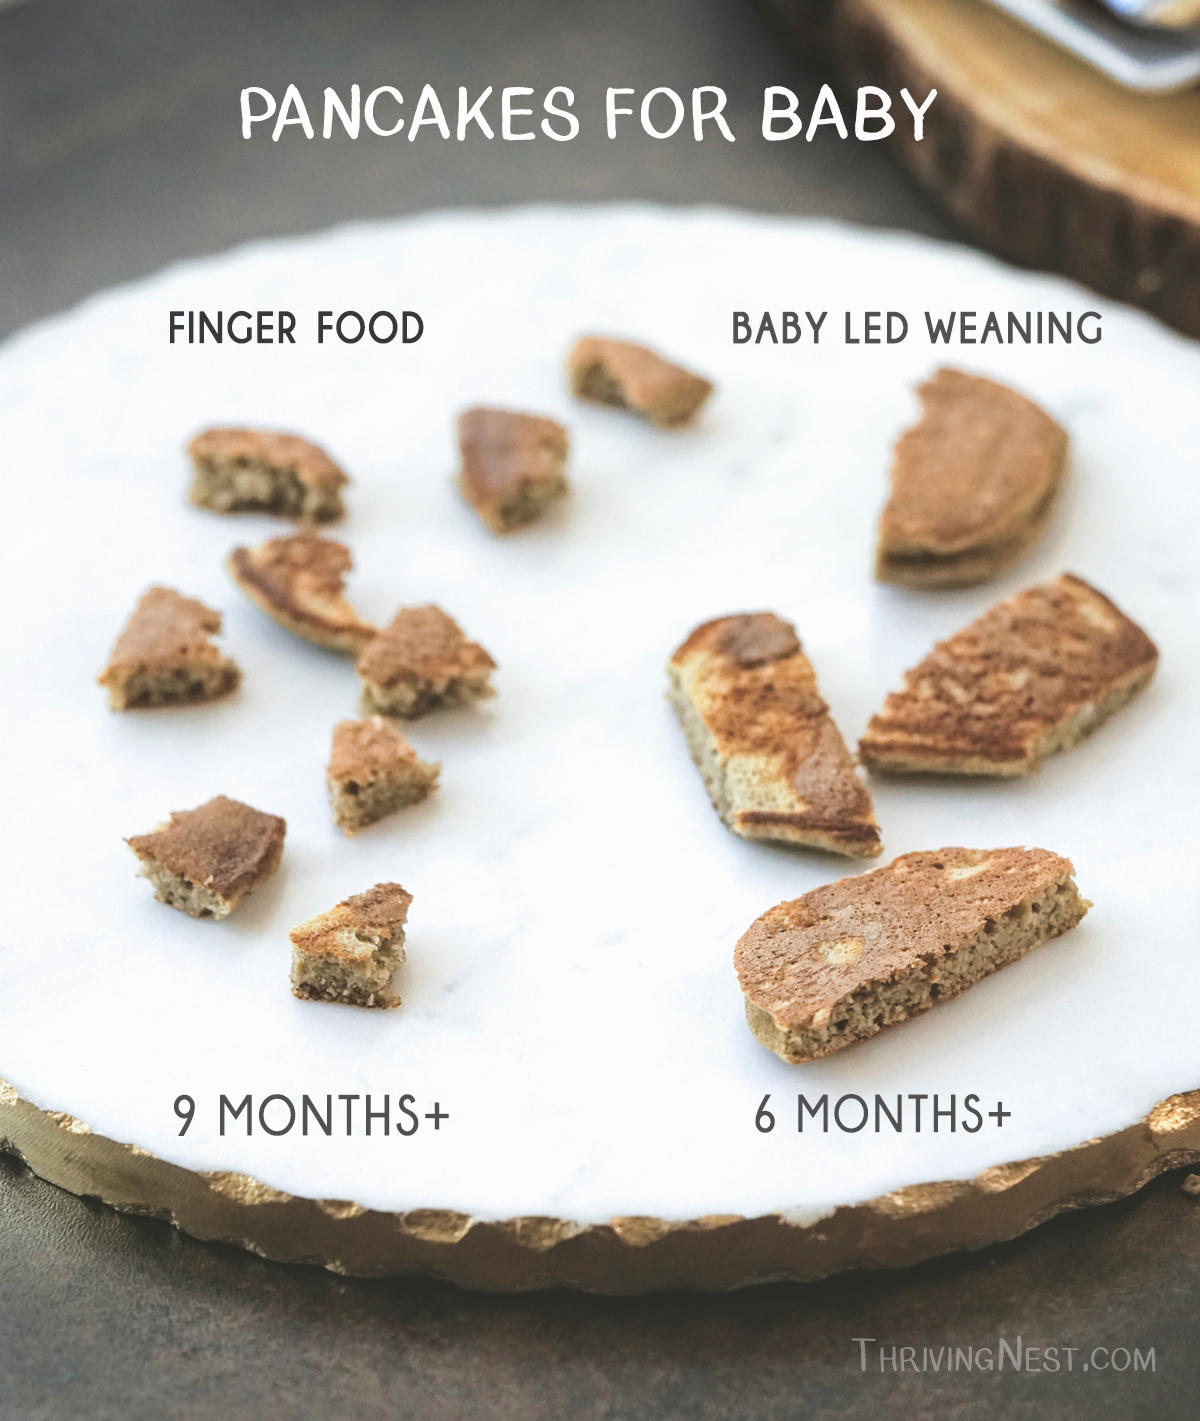 How to Serve Pancakes to Baby? 